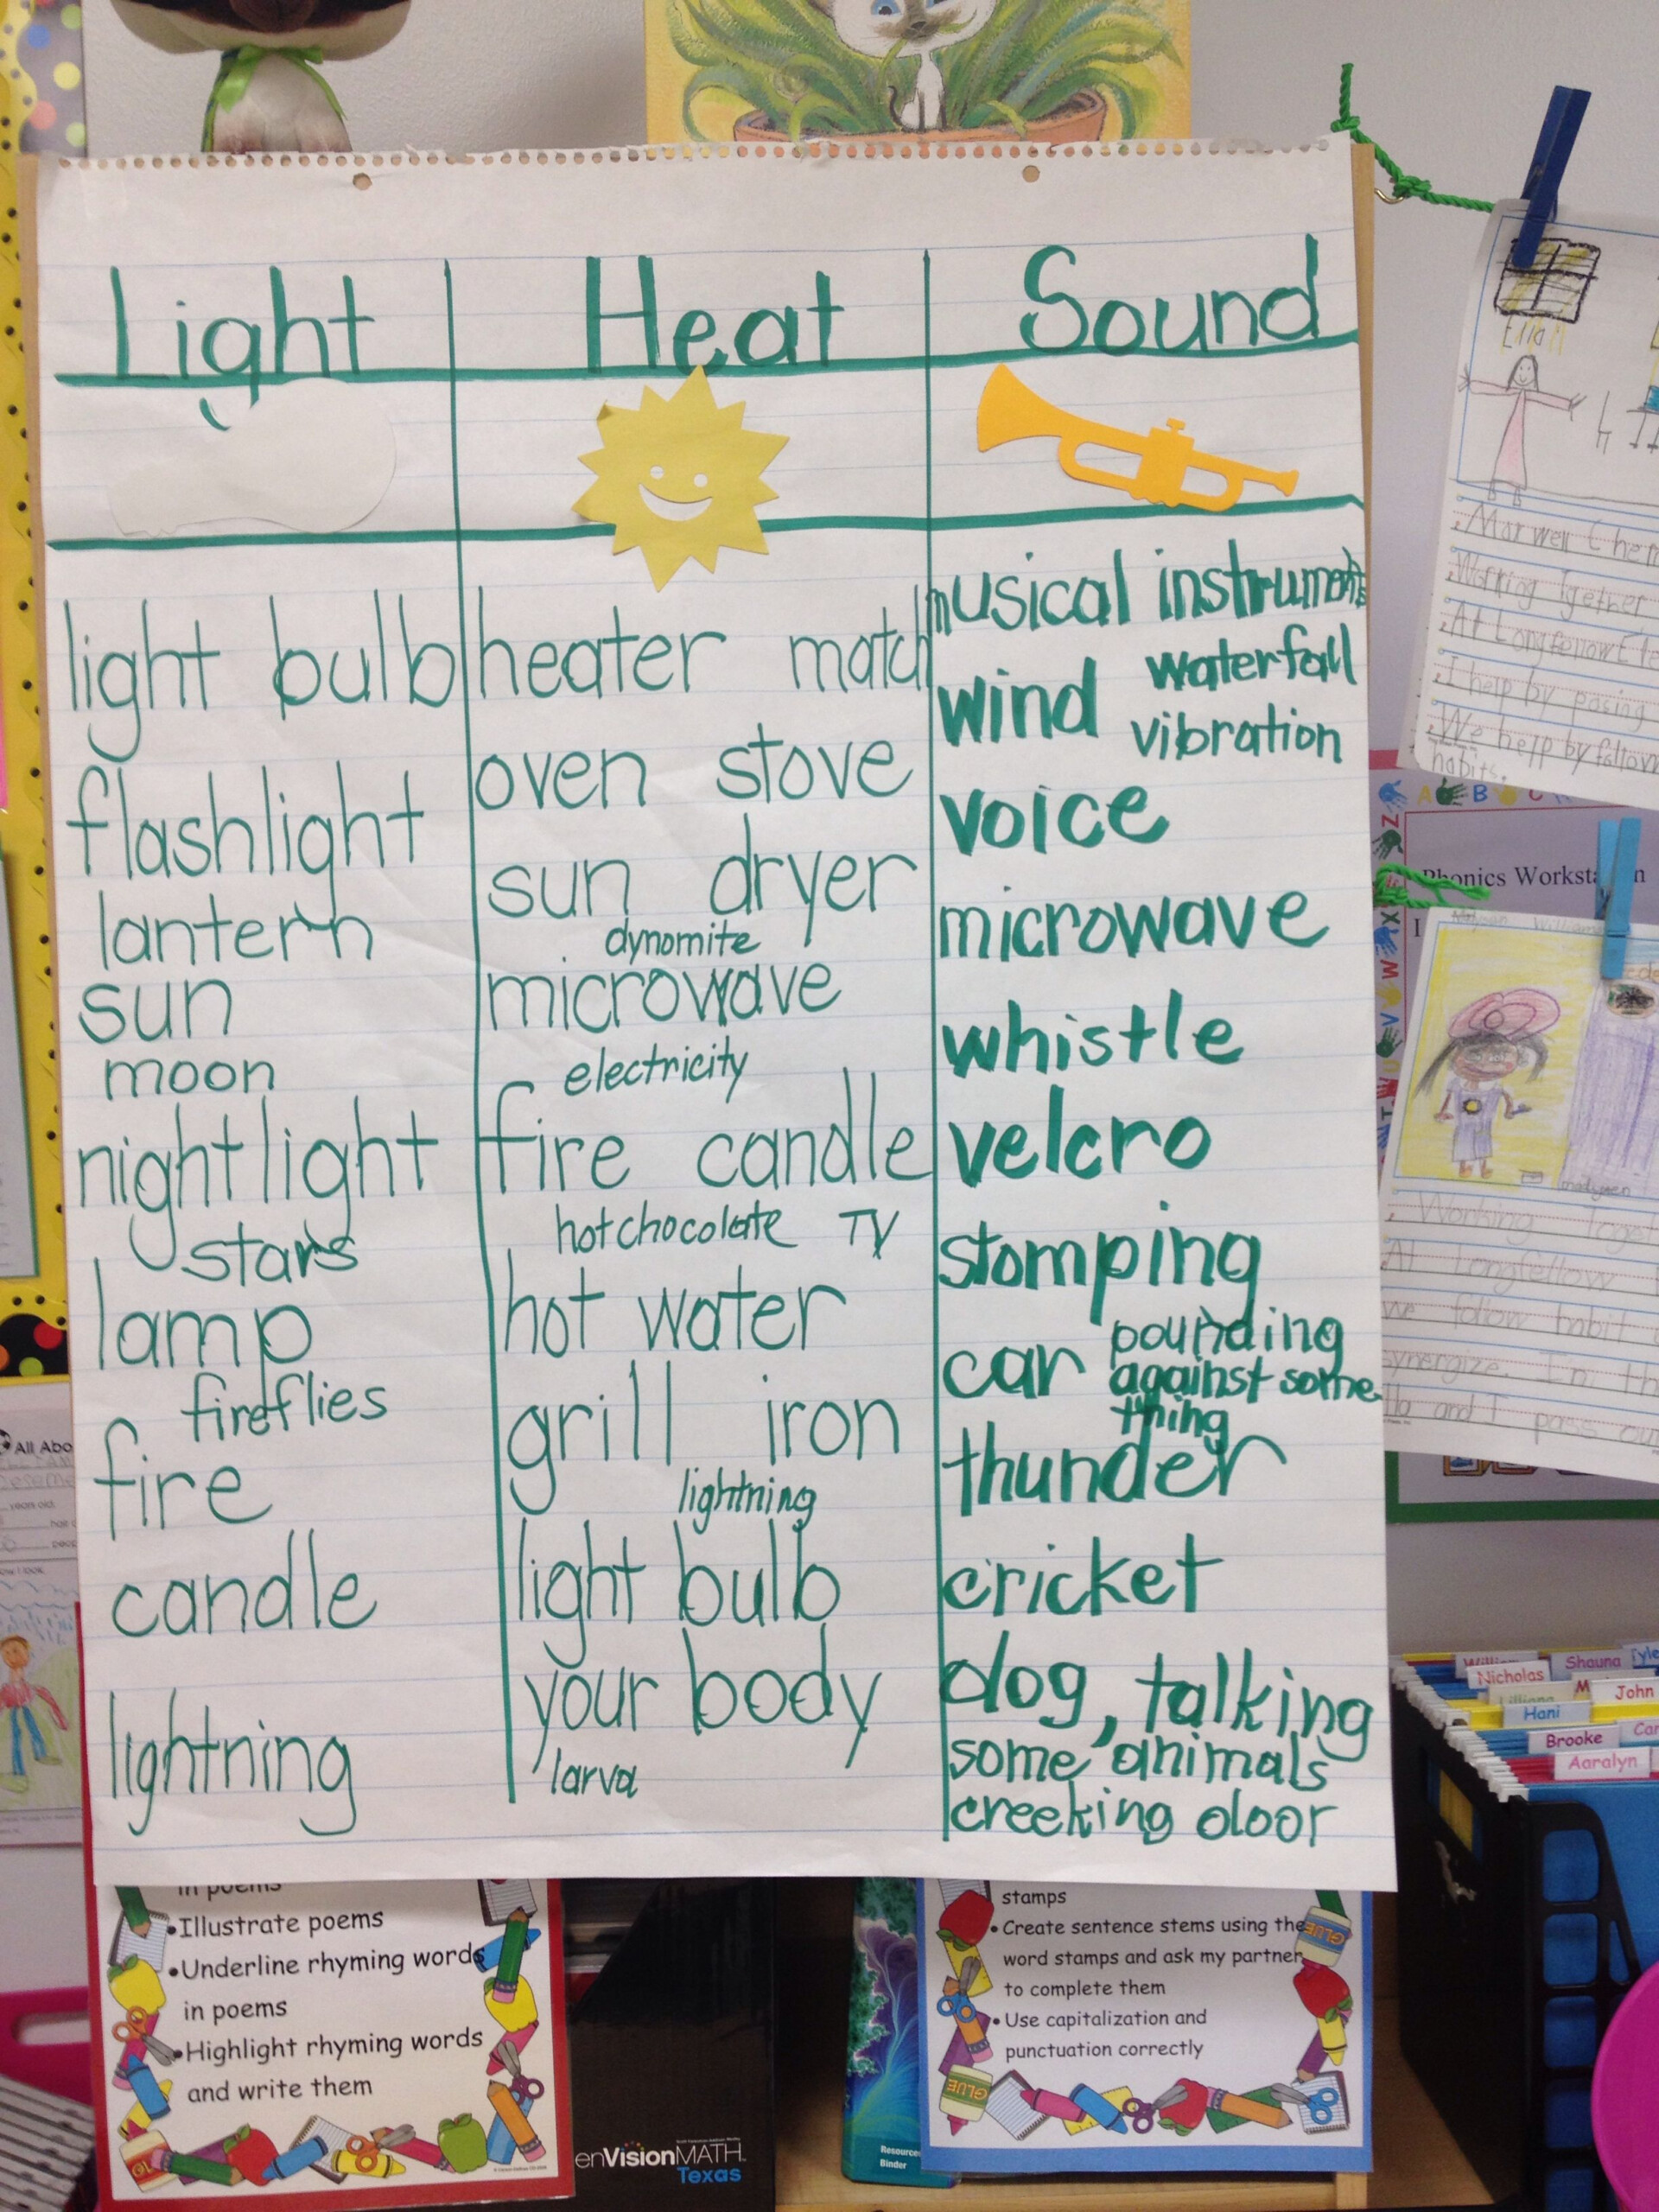 Science Heat Light Sound Math Fact Worksheets Physical Science